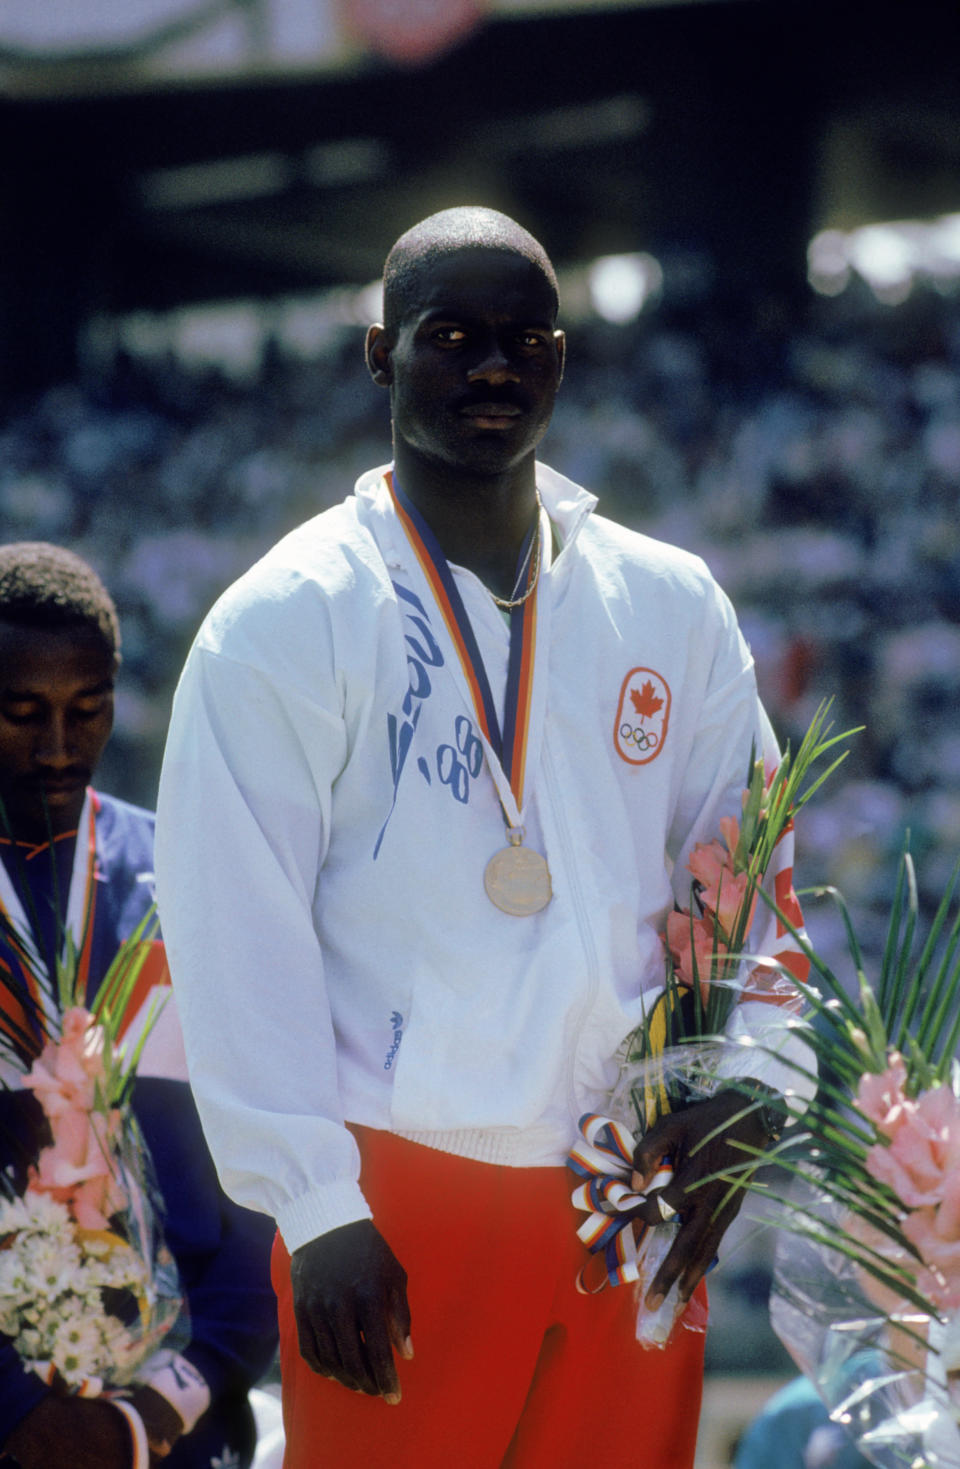 Canadian sprinter Ben Johnson on the winners podium with his gold medal after winning the 100 Metres event at Seoul Olympic Stadium during the Olympic Games in Seoul, South Korea, 24th September 1988. On the left is bronze medal winner Linford Christie of Great Britain. Johnson won the event in a world record time of 9.79 seconds, but was disqualified for doping, with Carl Lewis of the USA, taking the title. (Photo by Tony Duffy/Getty Images)